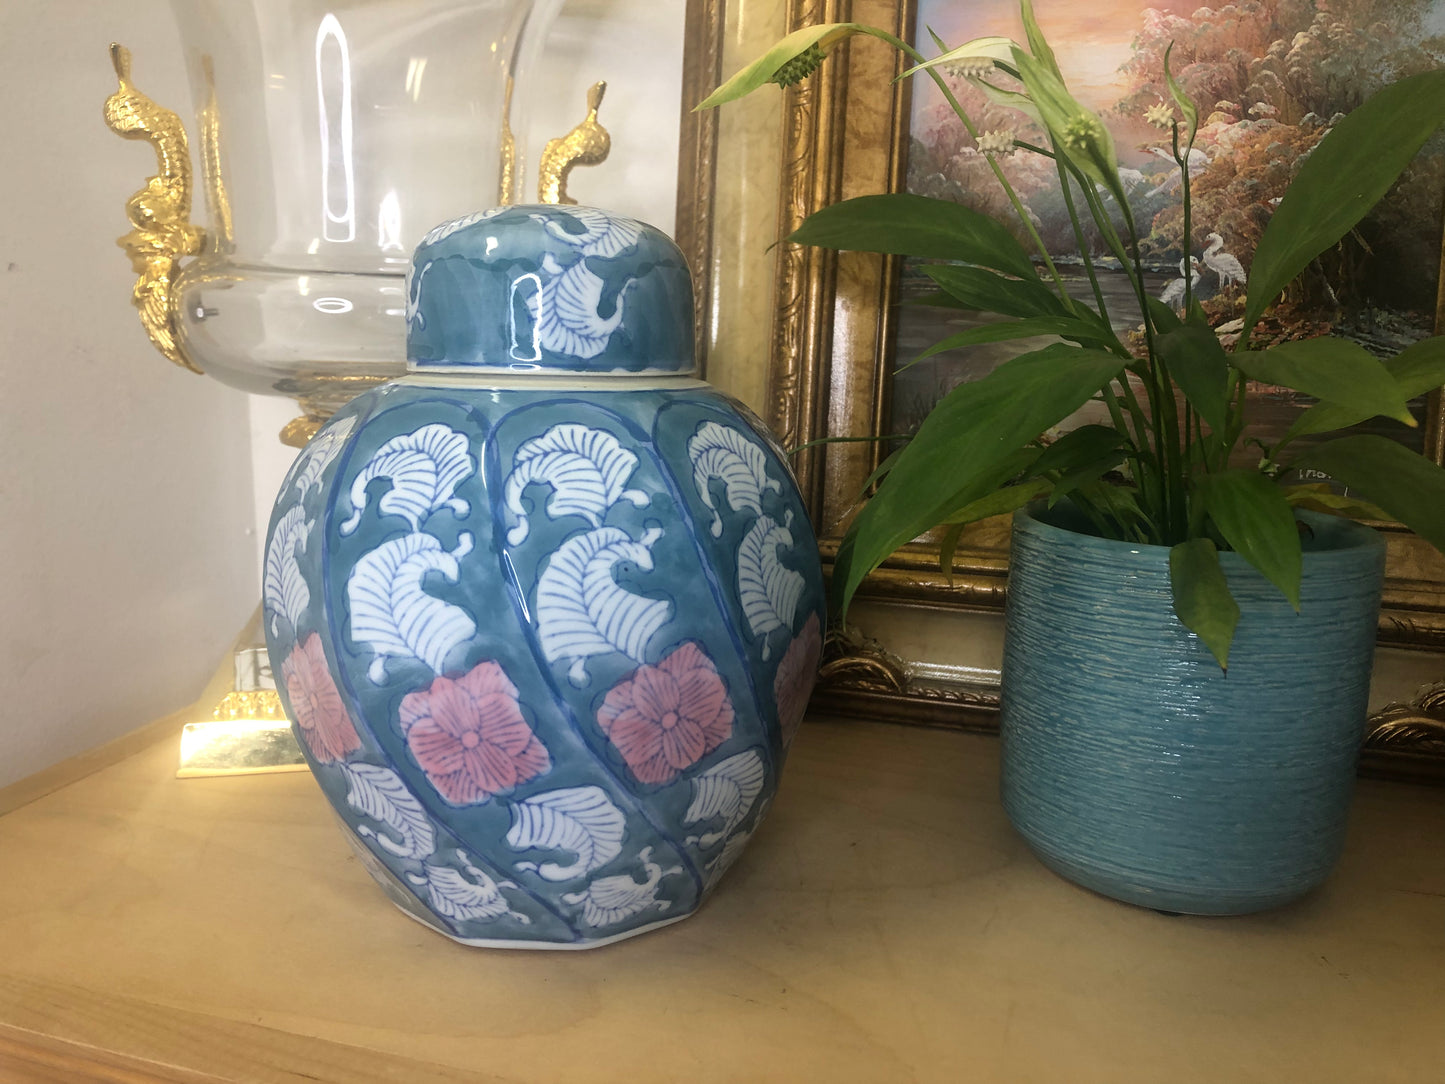 Beautiful pastel swirled ginger jar - Excellent condition!